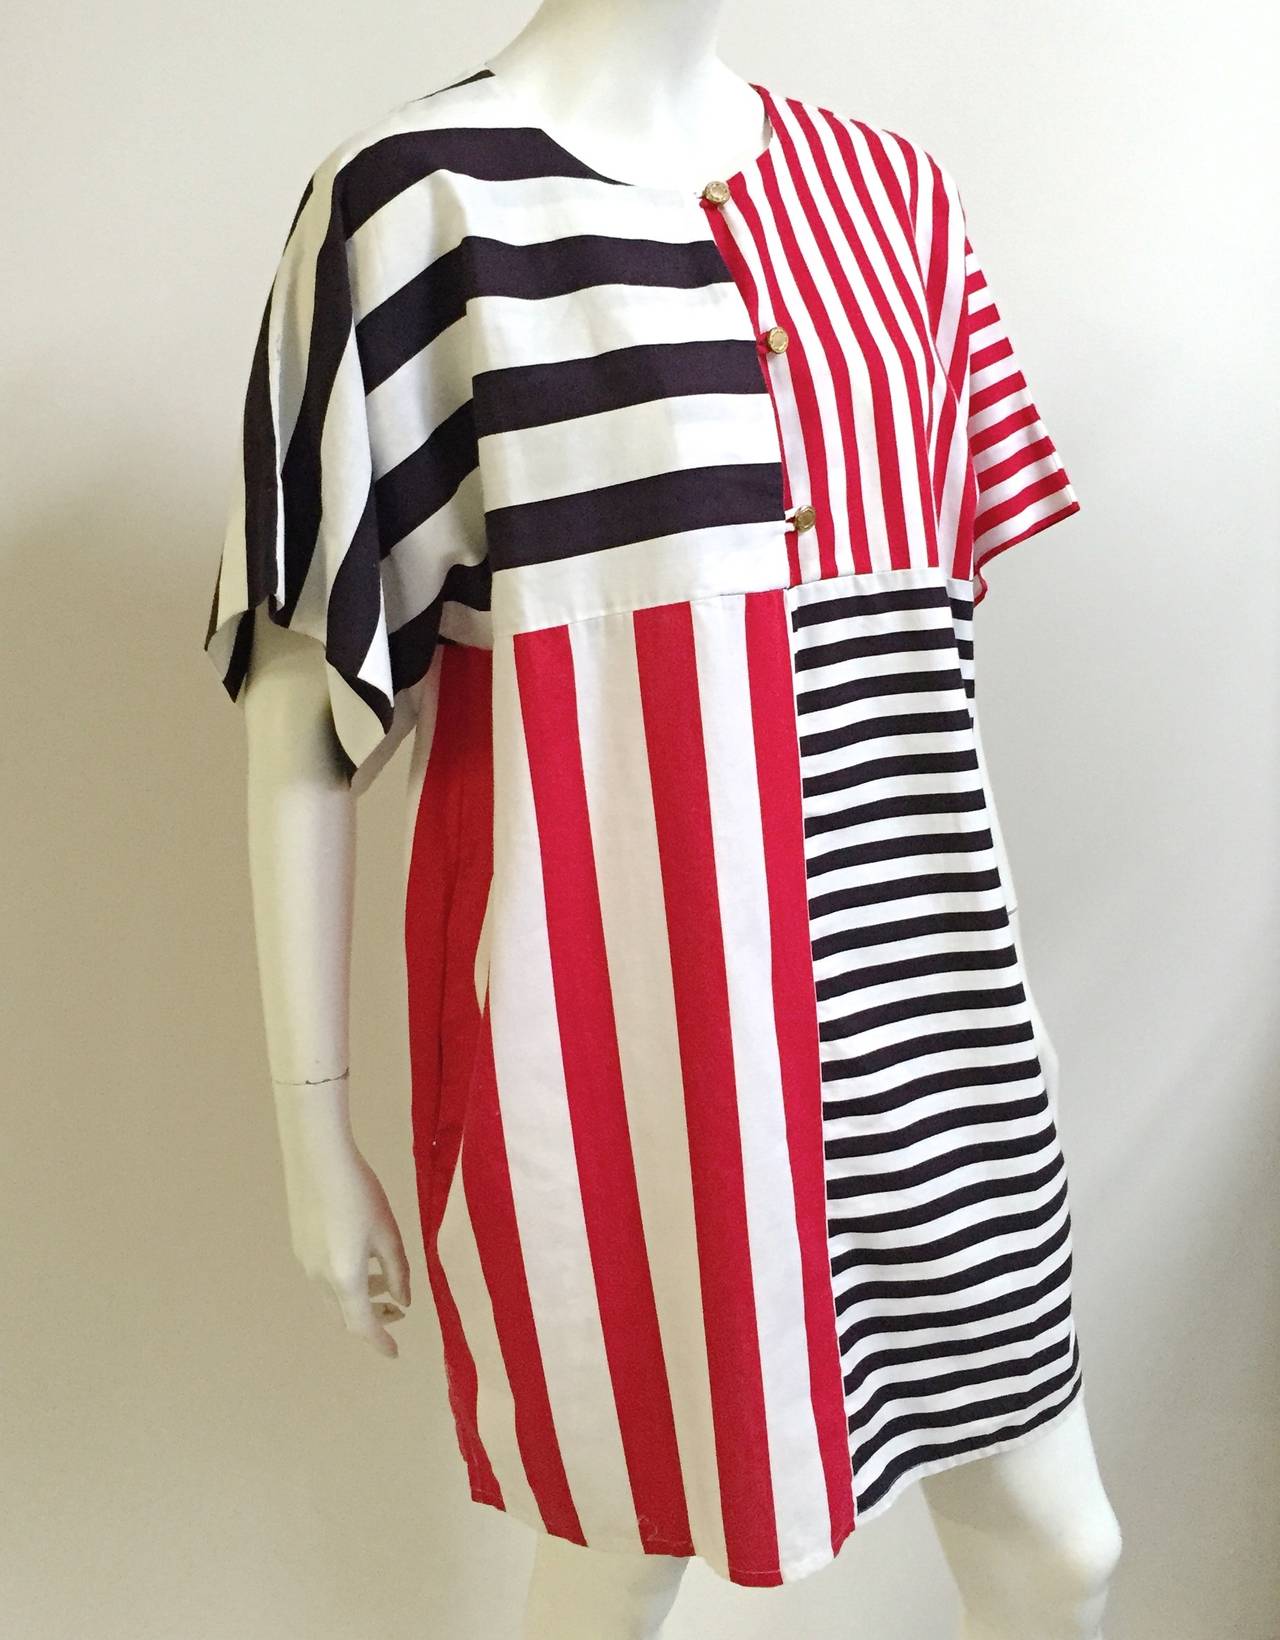 Pierre Cardin 1980s striped cotton dress with pockets is casual for day wear or lounging by the swimming pool ~ beach side. Dress has pockets and is 100% cotton. Fantastic abstract design makes this a very modern chic piece. Size medium so this